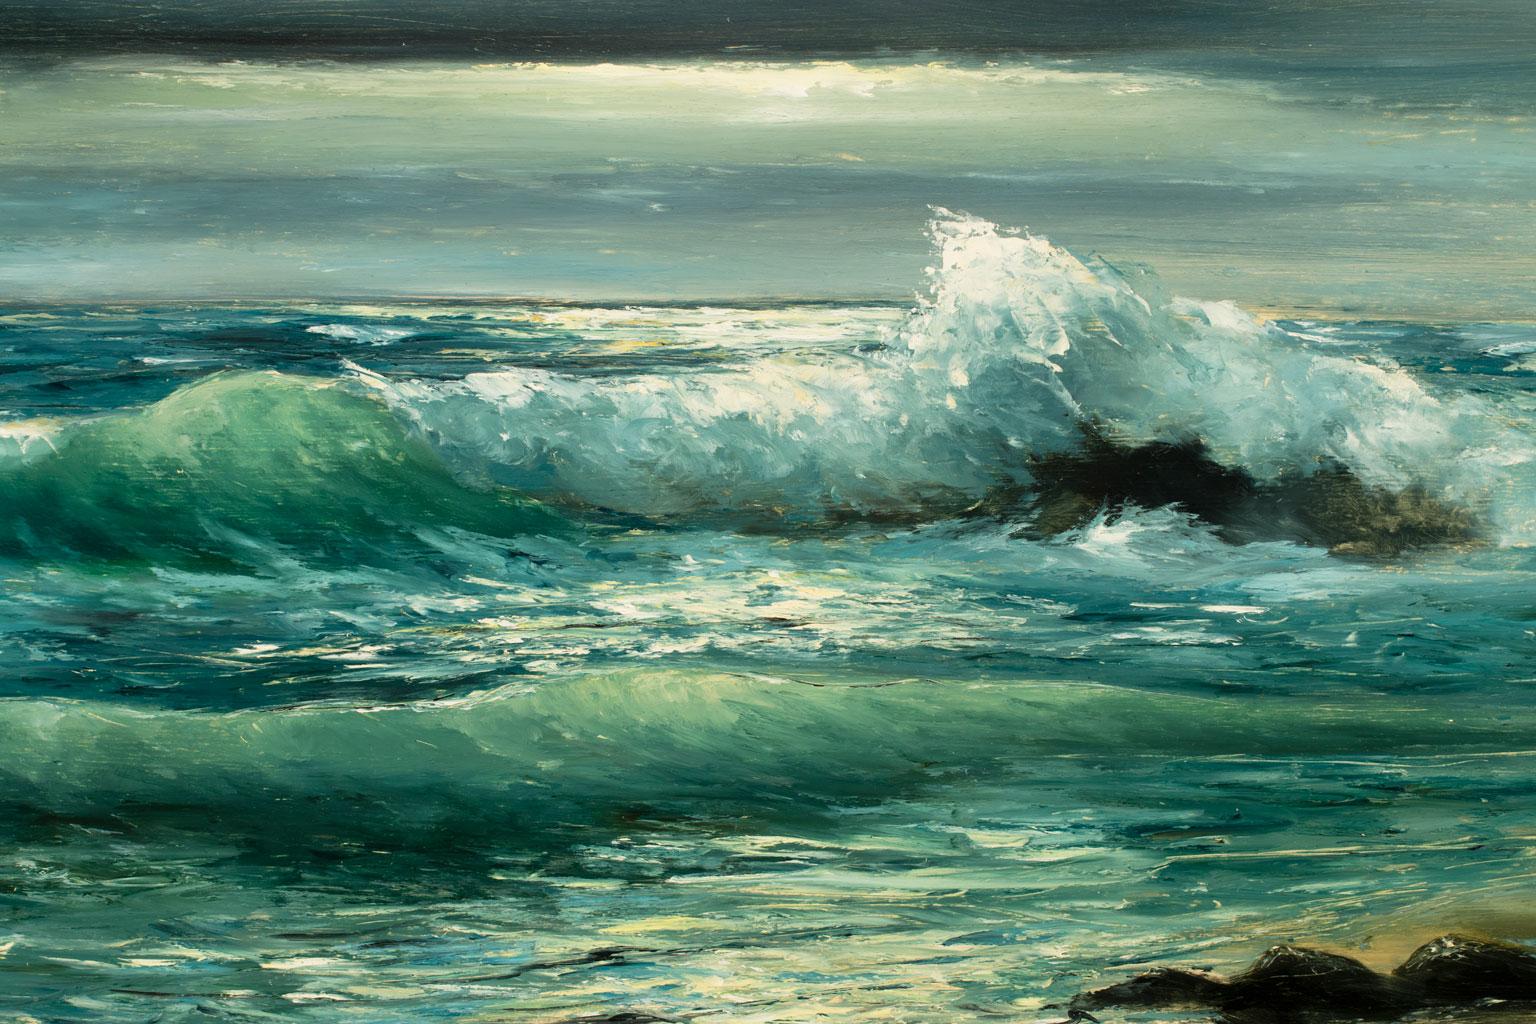 Untitled Seascape, an original oil on board by Violet Parkhurst, is a piece for the true collector. Parkhurst's unique ability to capture the ocean is second-to-none. Her works have captivated viewers for eight decades. She is regarded as one of the